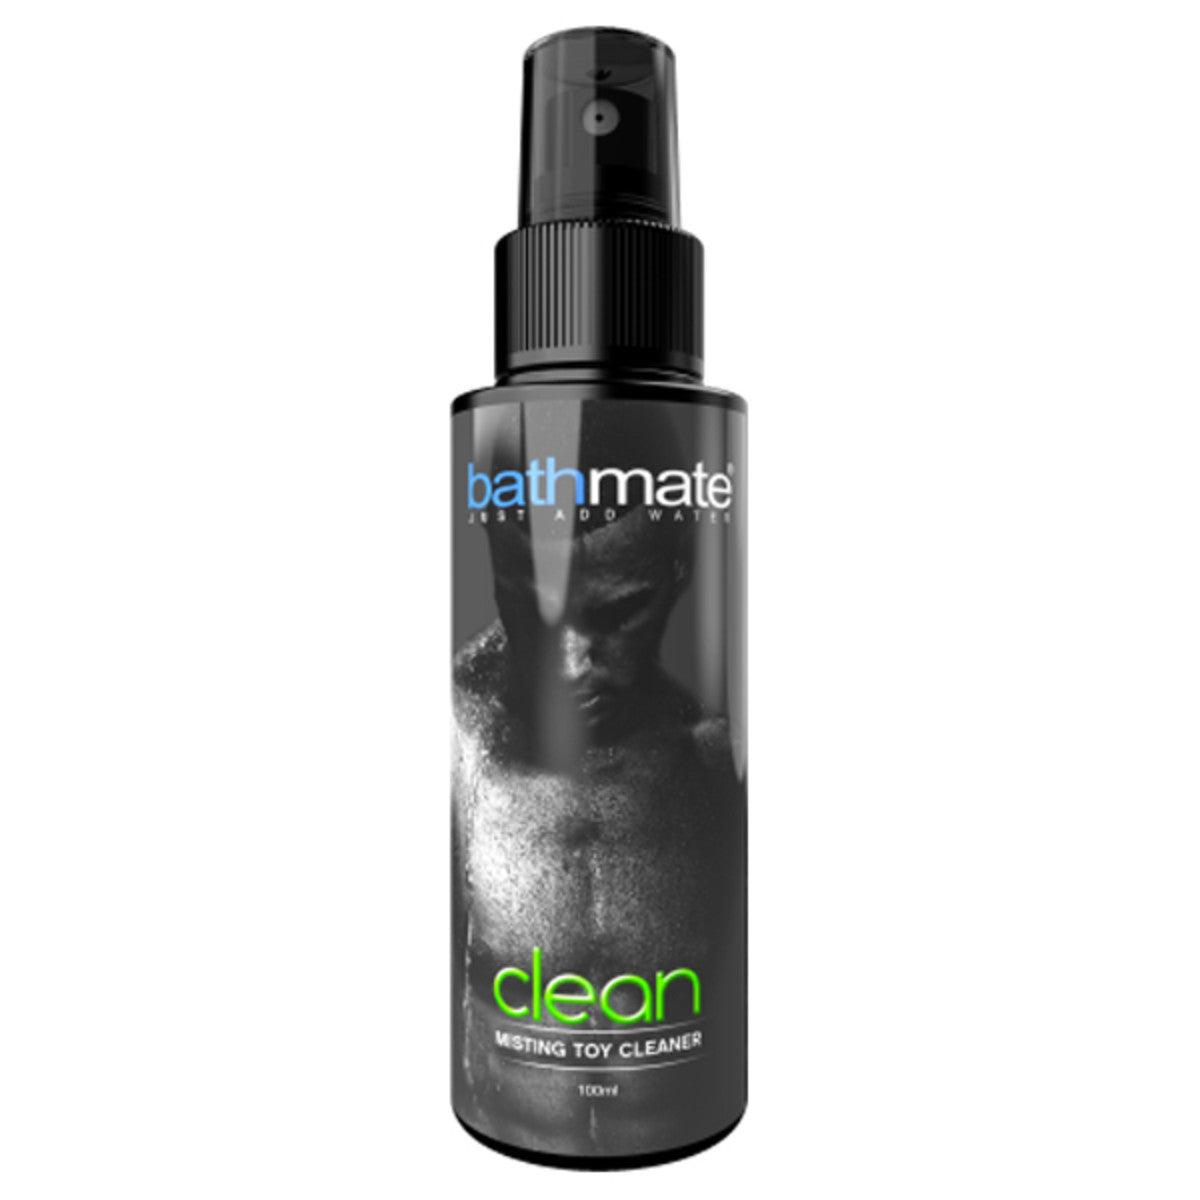 Clean Misting Adult Toy Cleaner